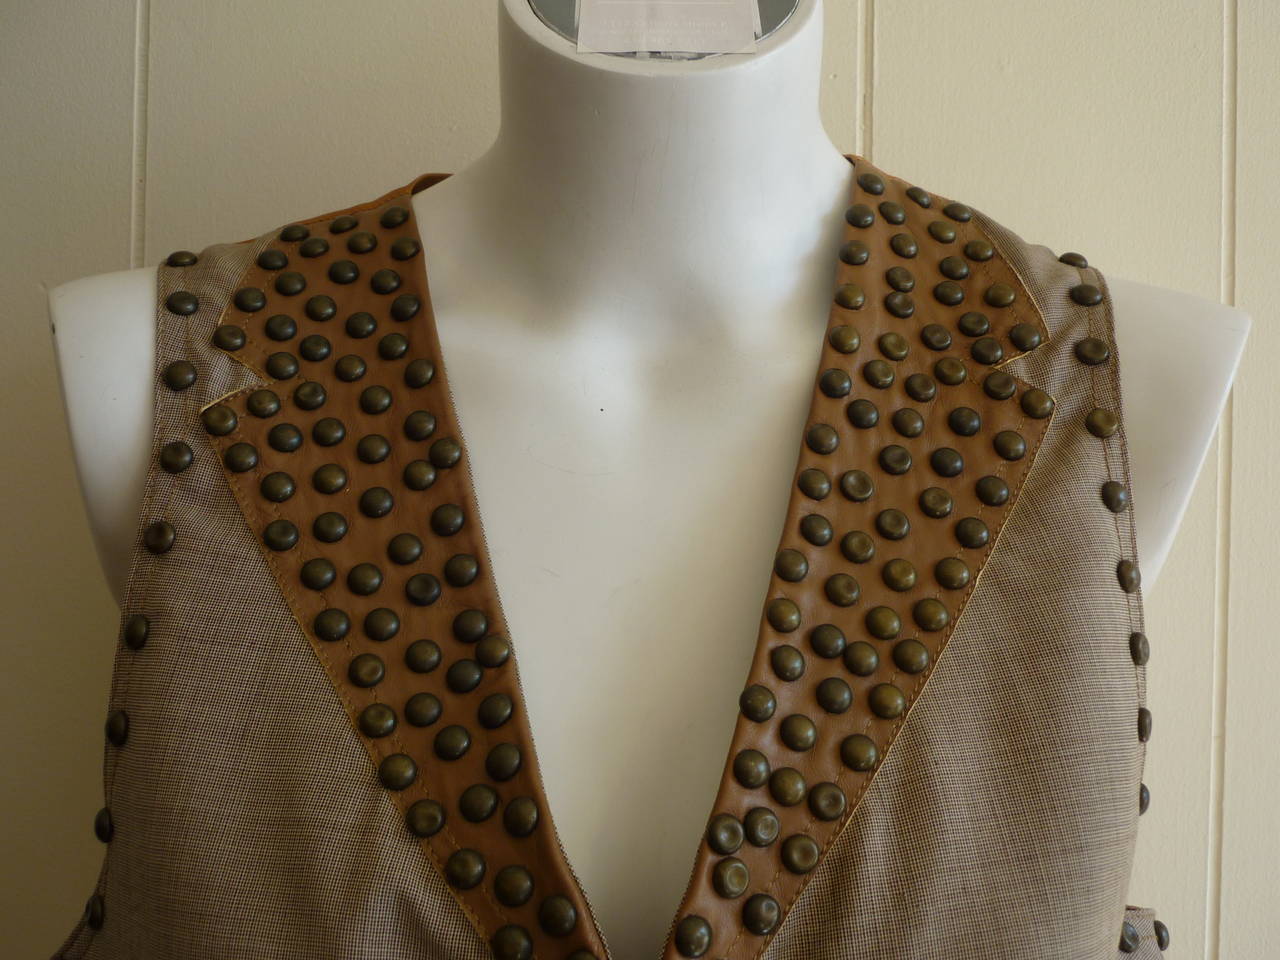 Stunning waistcoat in a fine worsted wool with leather trim at the front v-neckline and pockets. This vest is heavily studded with two slit pockets. The back in a bronze/burnt gold viscose with a half belt and buckle.

Made in Italy